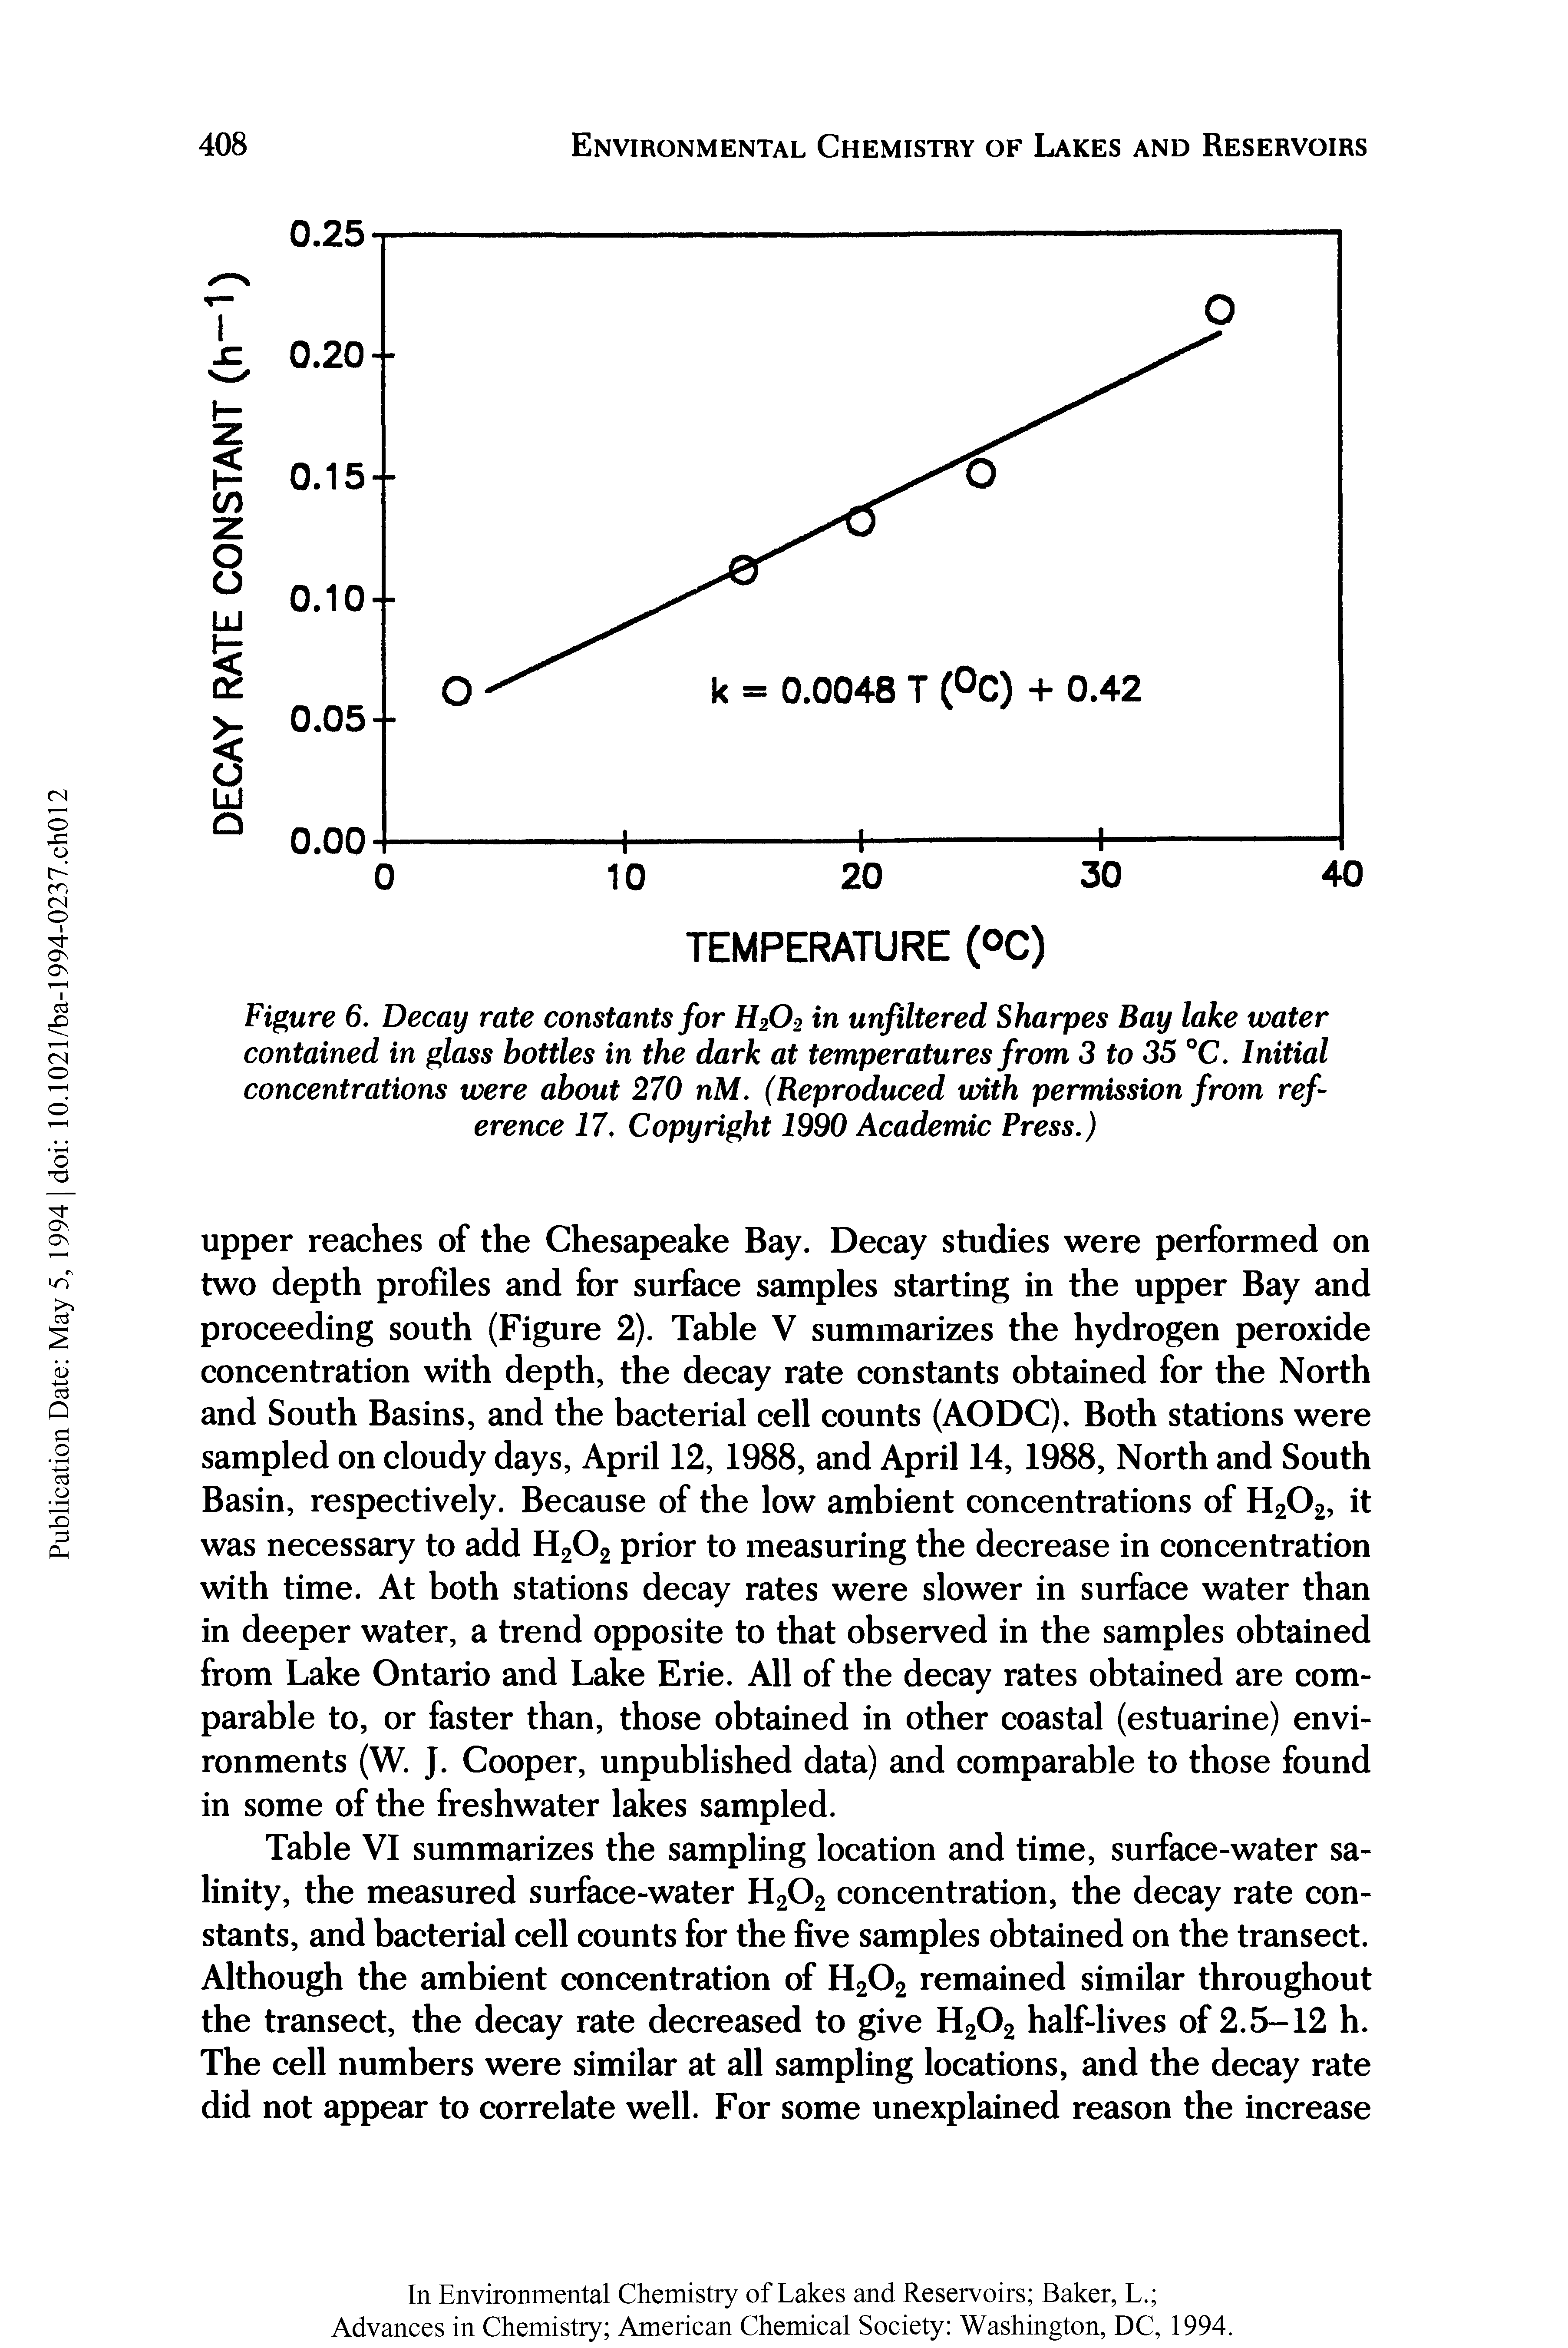 Table VI summarizes the sampling location and time, surface-water salinity, the measured surface-water H202 concentration, the decay rate constants, and bacterial cell counts for the five samples obtained on the transect. Although the ambient concentration of H202 remained similar throughout the transect, the decay rate decreased to give H202 half-lives of 2.5-12 h. The cell numbers were similar at all sampling locations, and the decay rate did not appear to correlate well. For some unexplained reason the increase...